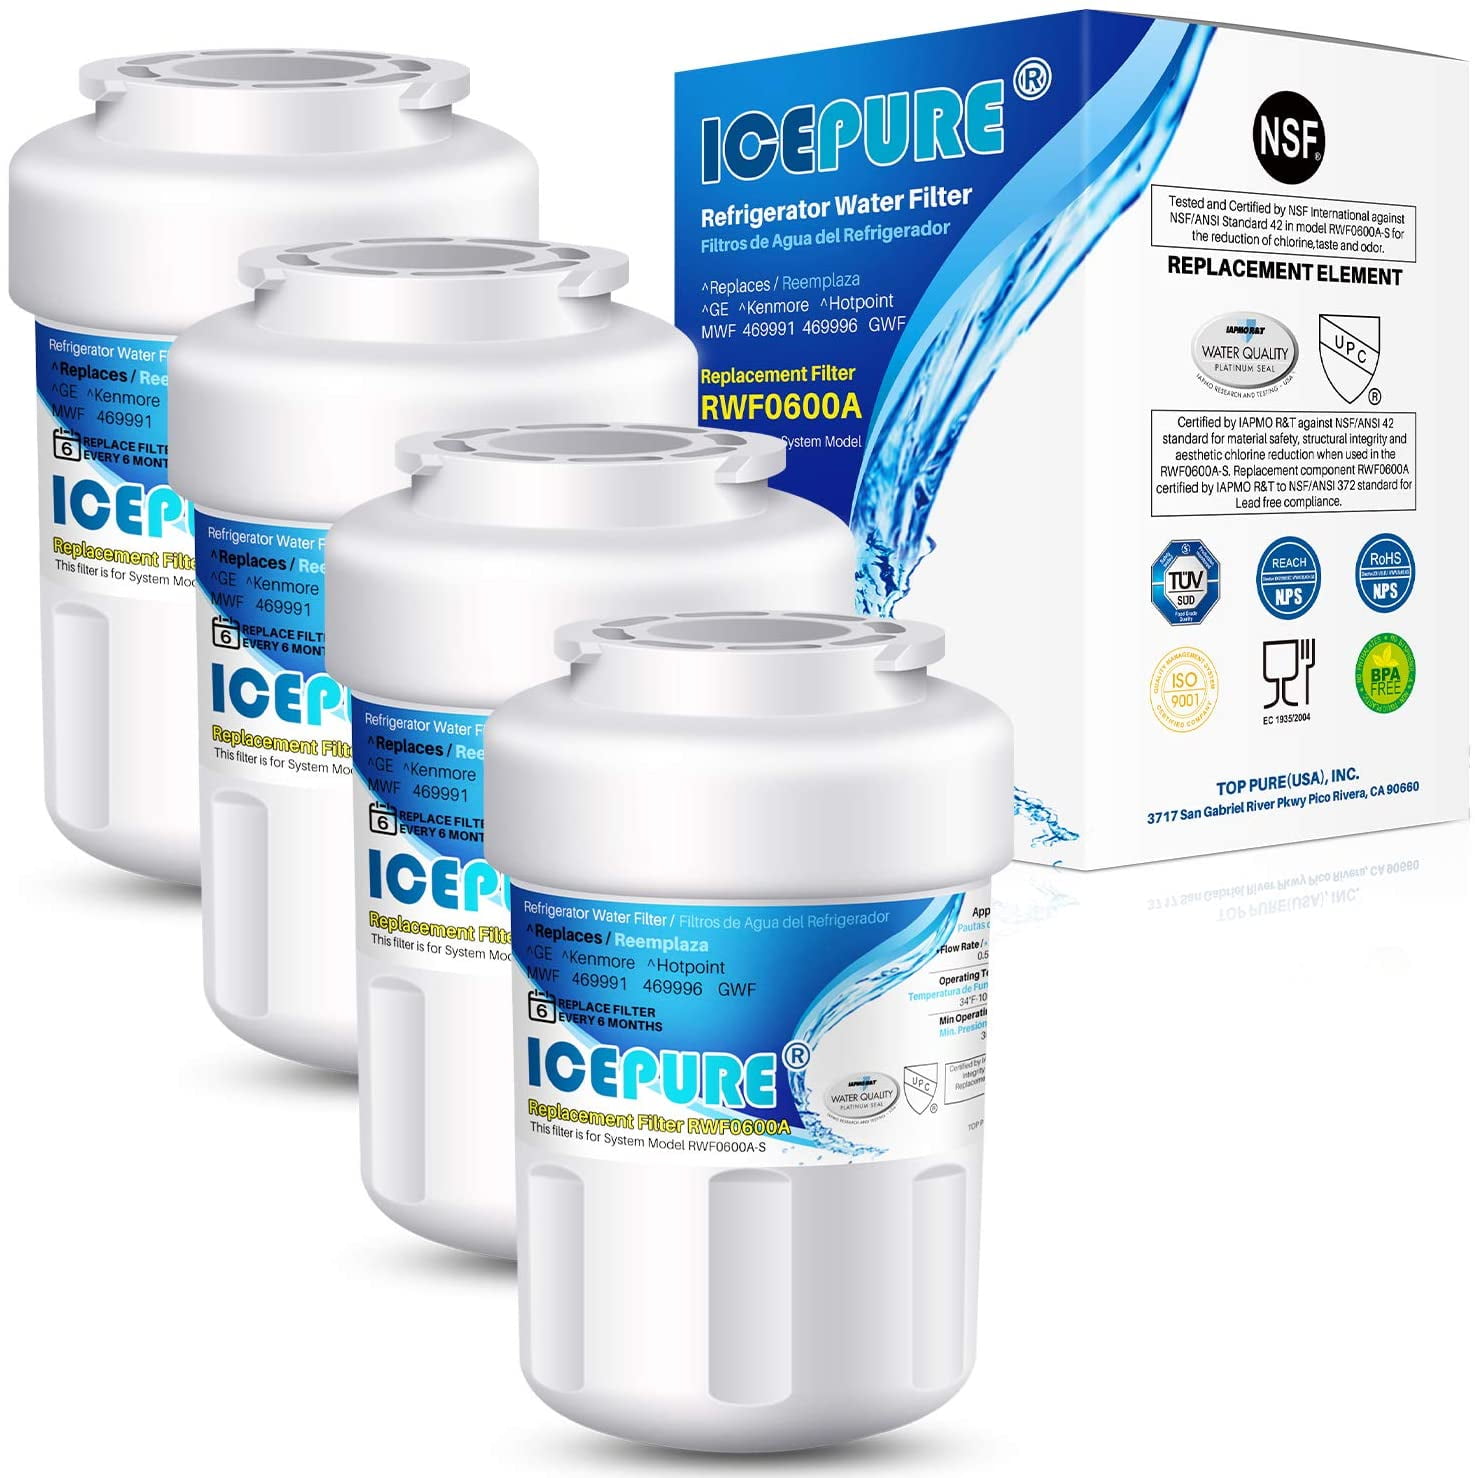 HDX FMG-1 GSE25GSHECSS AQUA CREST MWF Refrigerator Water Filter WFC1201 Kenmore 9991 Pack of 3 GWF MWFINT Packing May Vary Replacement for GE Smart Water MWF RWF1060 197D6321P006 MWFP MWFA 